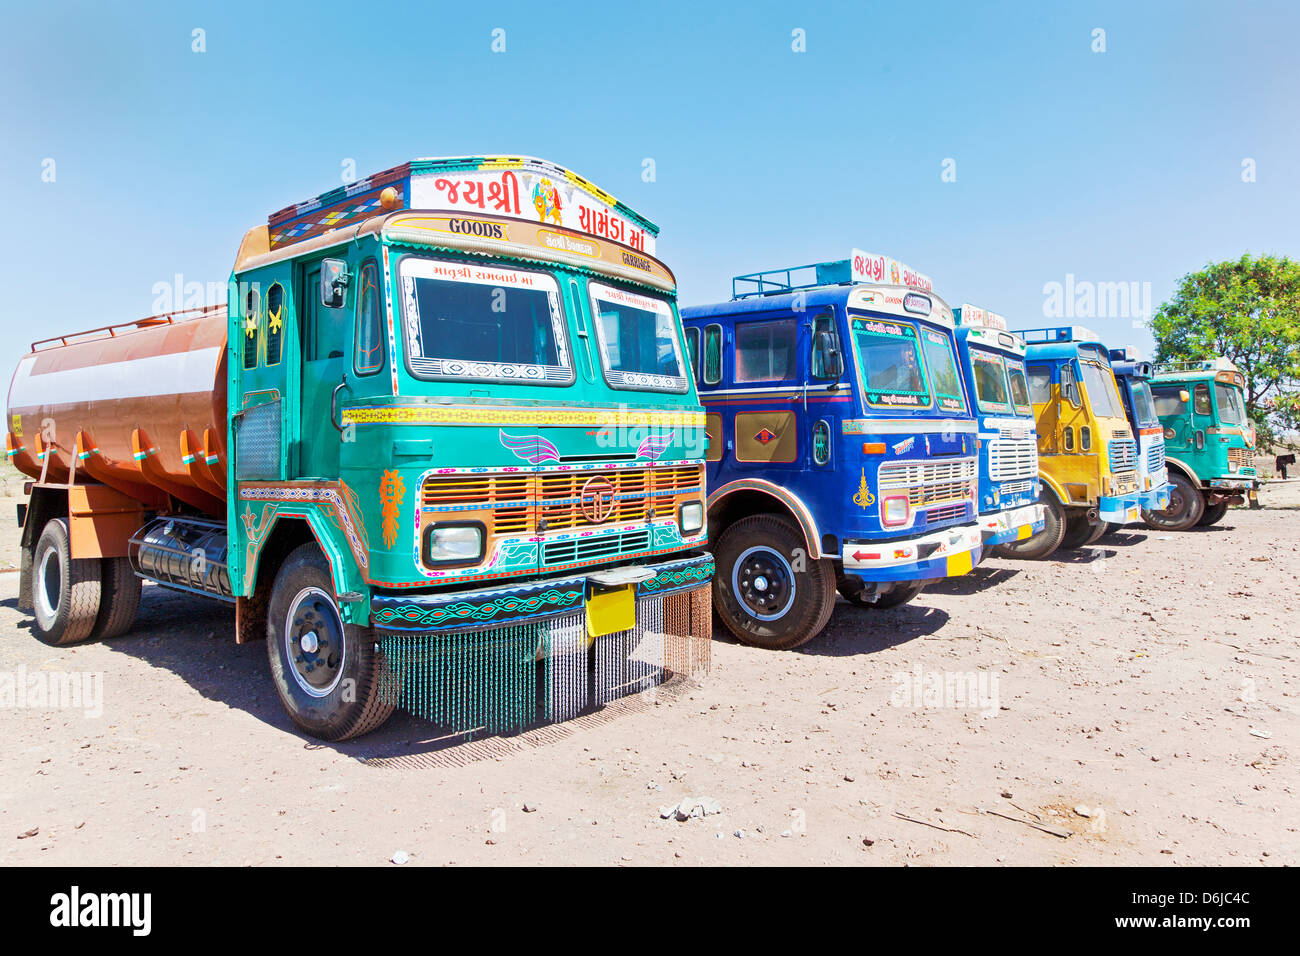 Colorful Indian heavy goods vehicles parked up at Dhabha (Indian truck stop) in the mid day sun Stock Photo